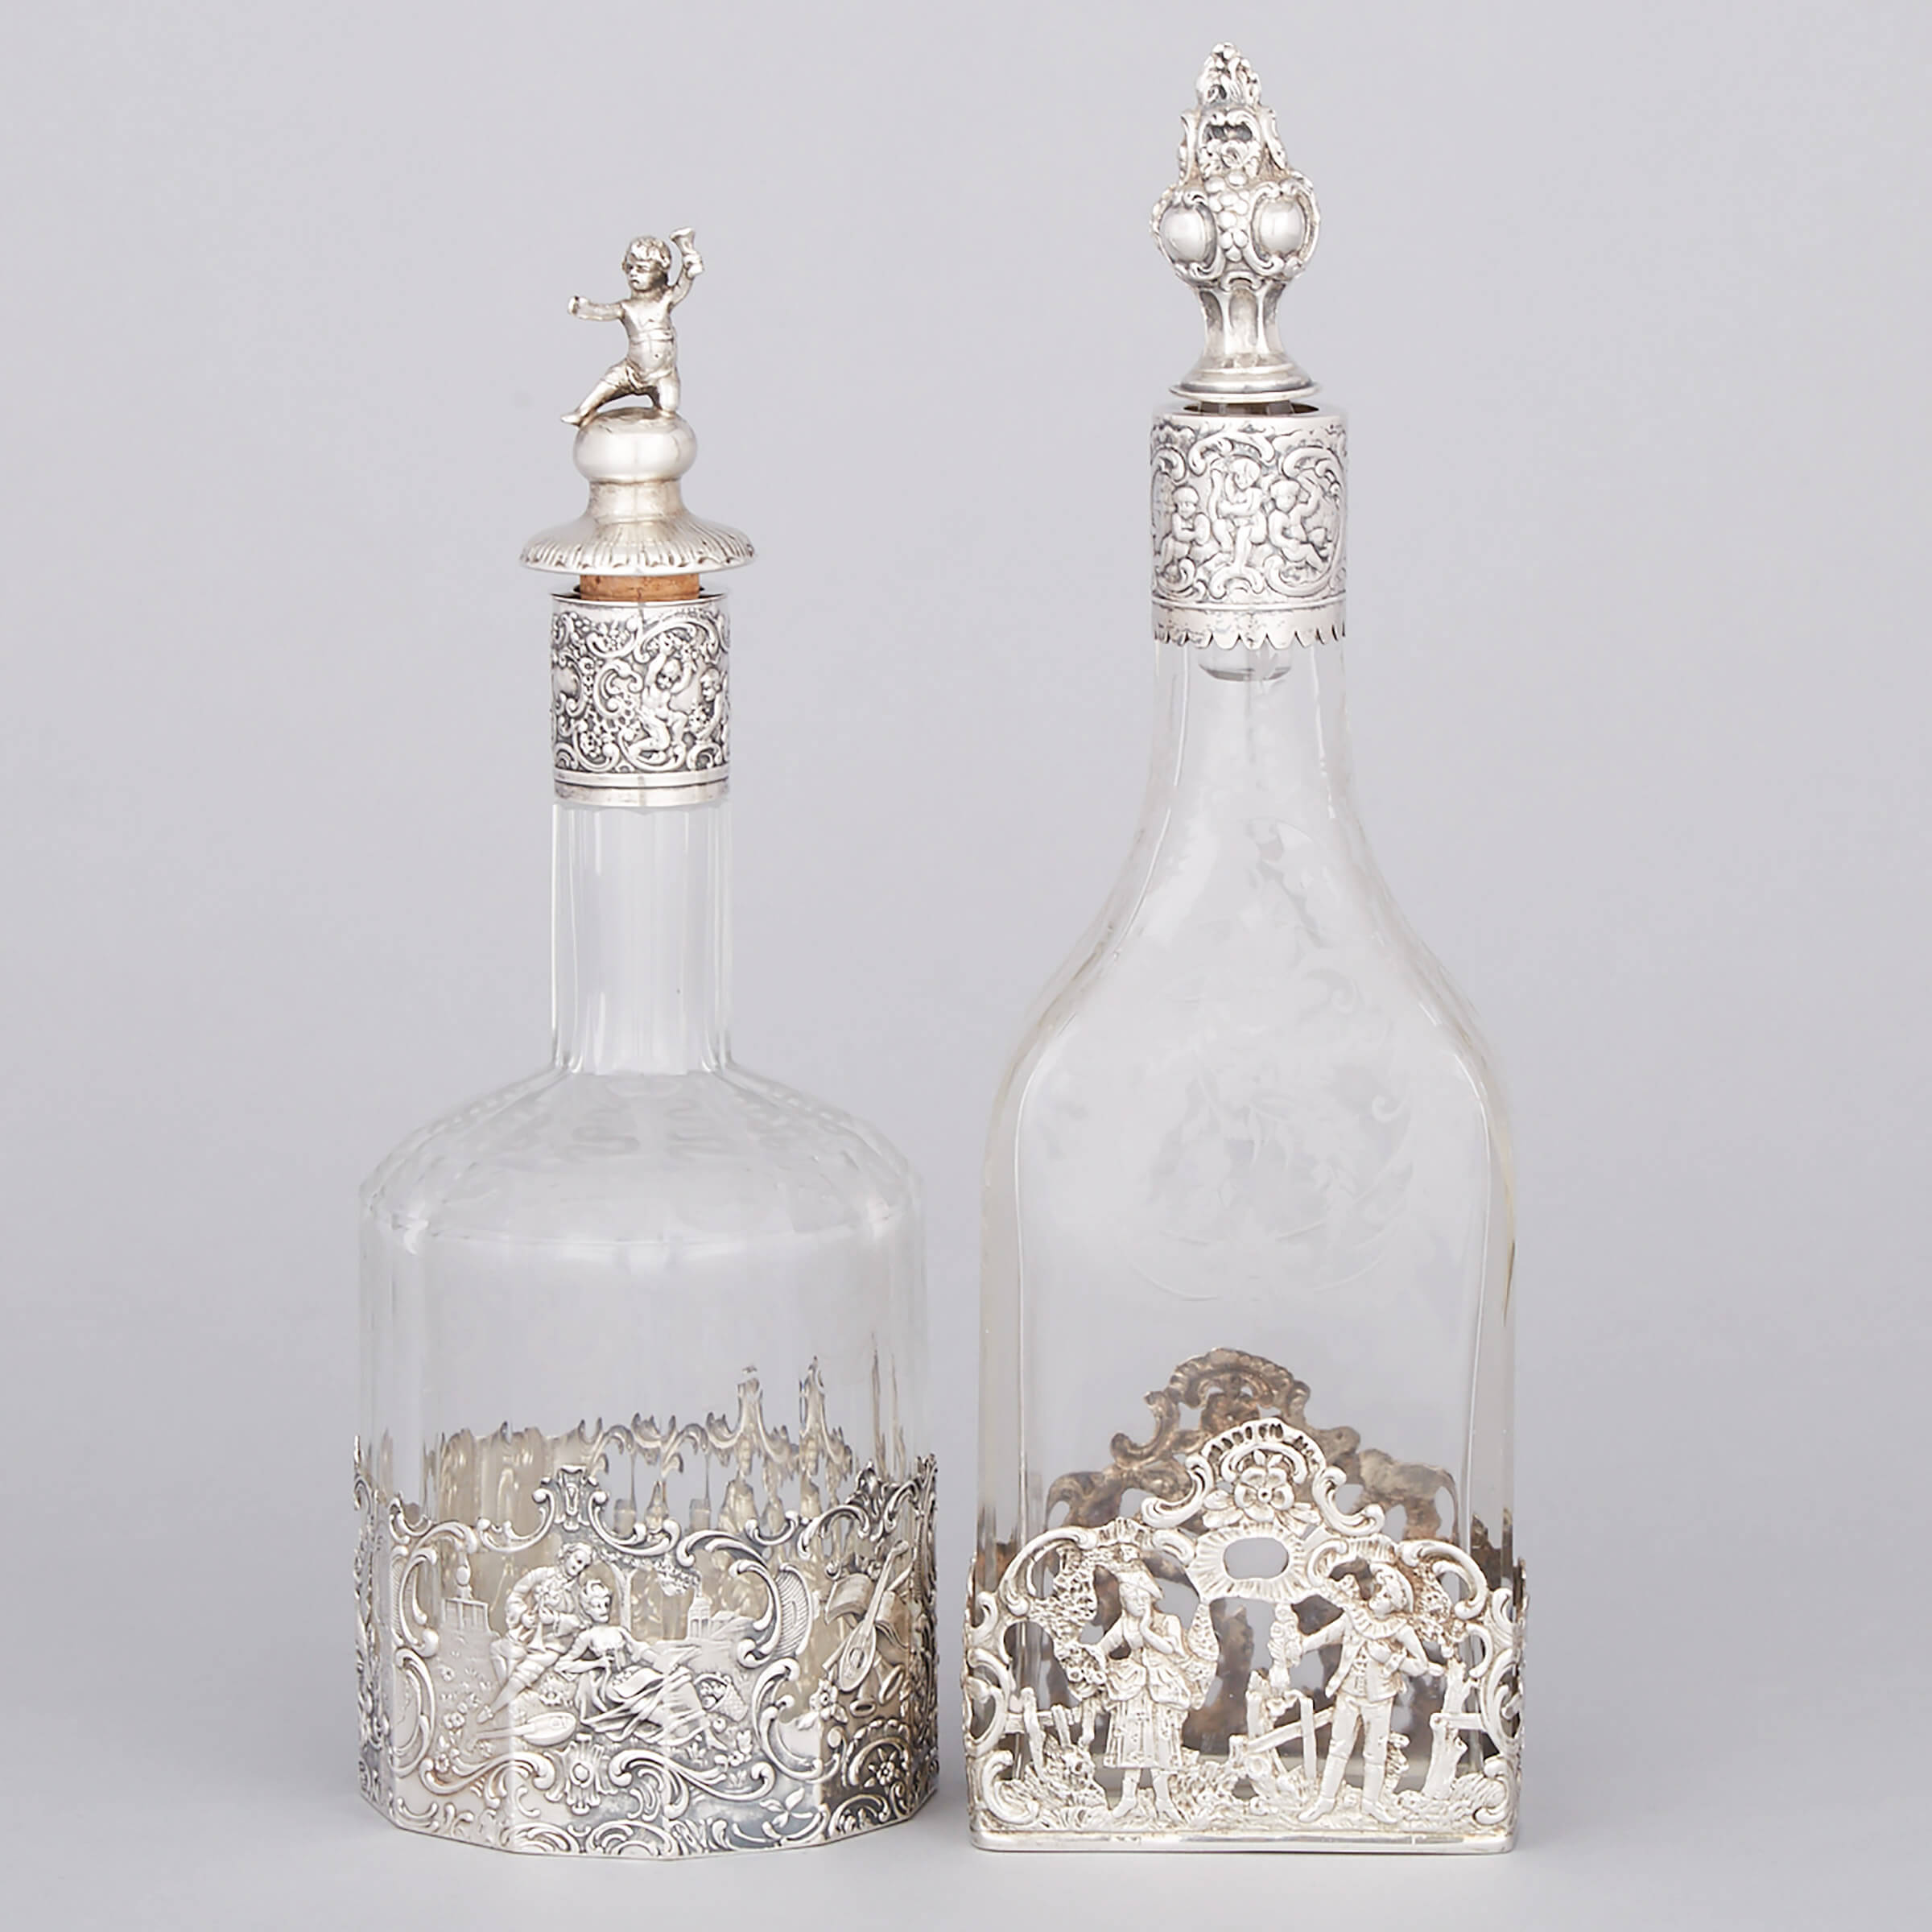 Two German Silver Mounted Etched Glass Decanters, Weinranck & Schmidt and J.D. Schleissner & Söhne, Hanau, c.1900